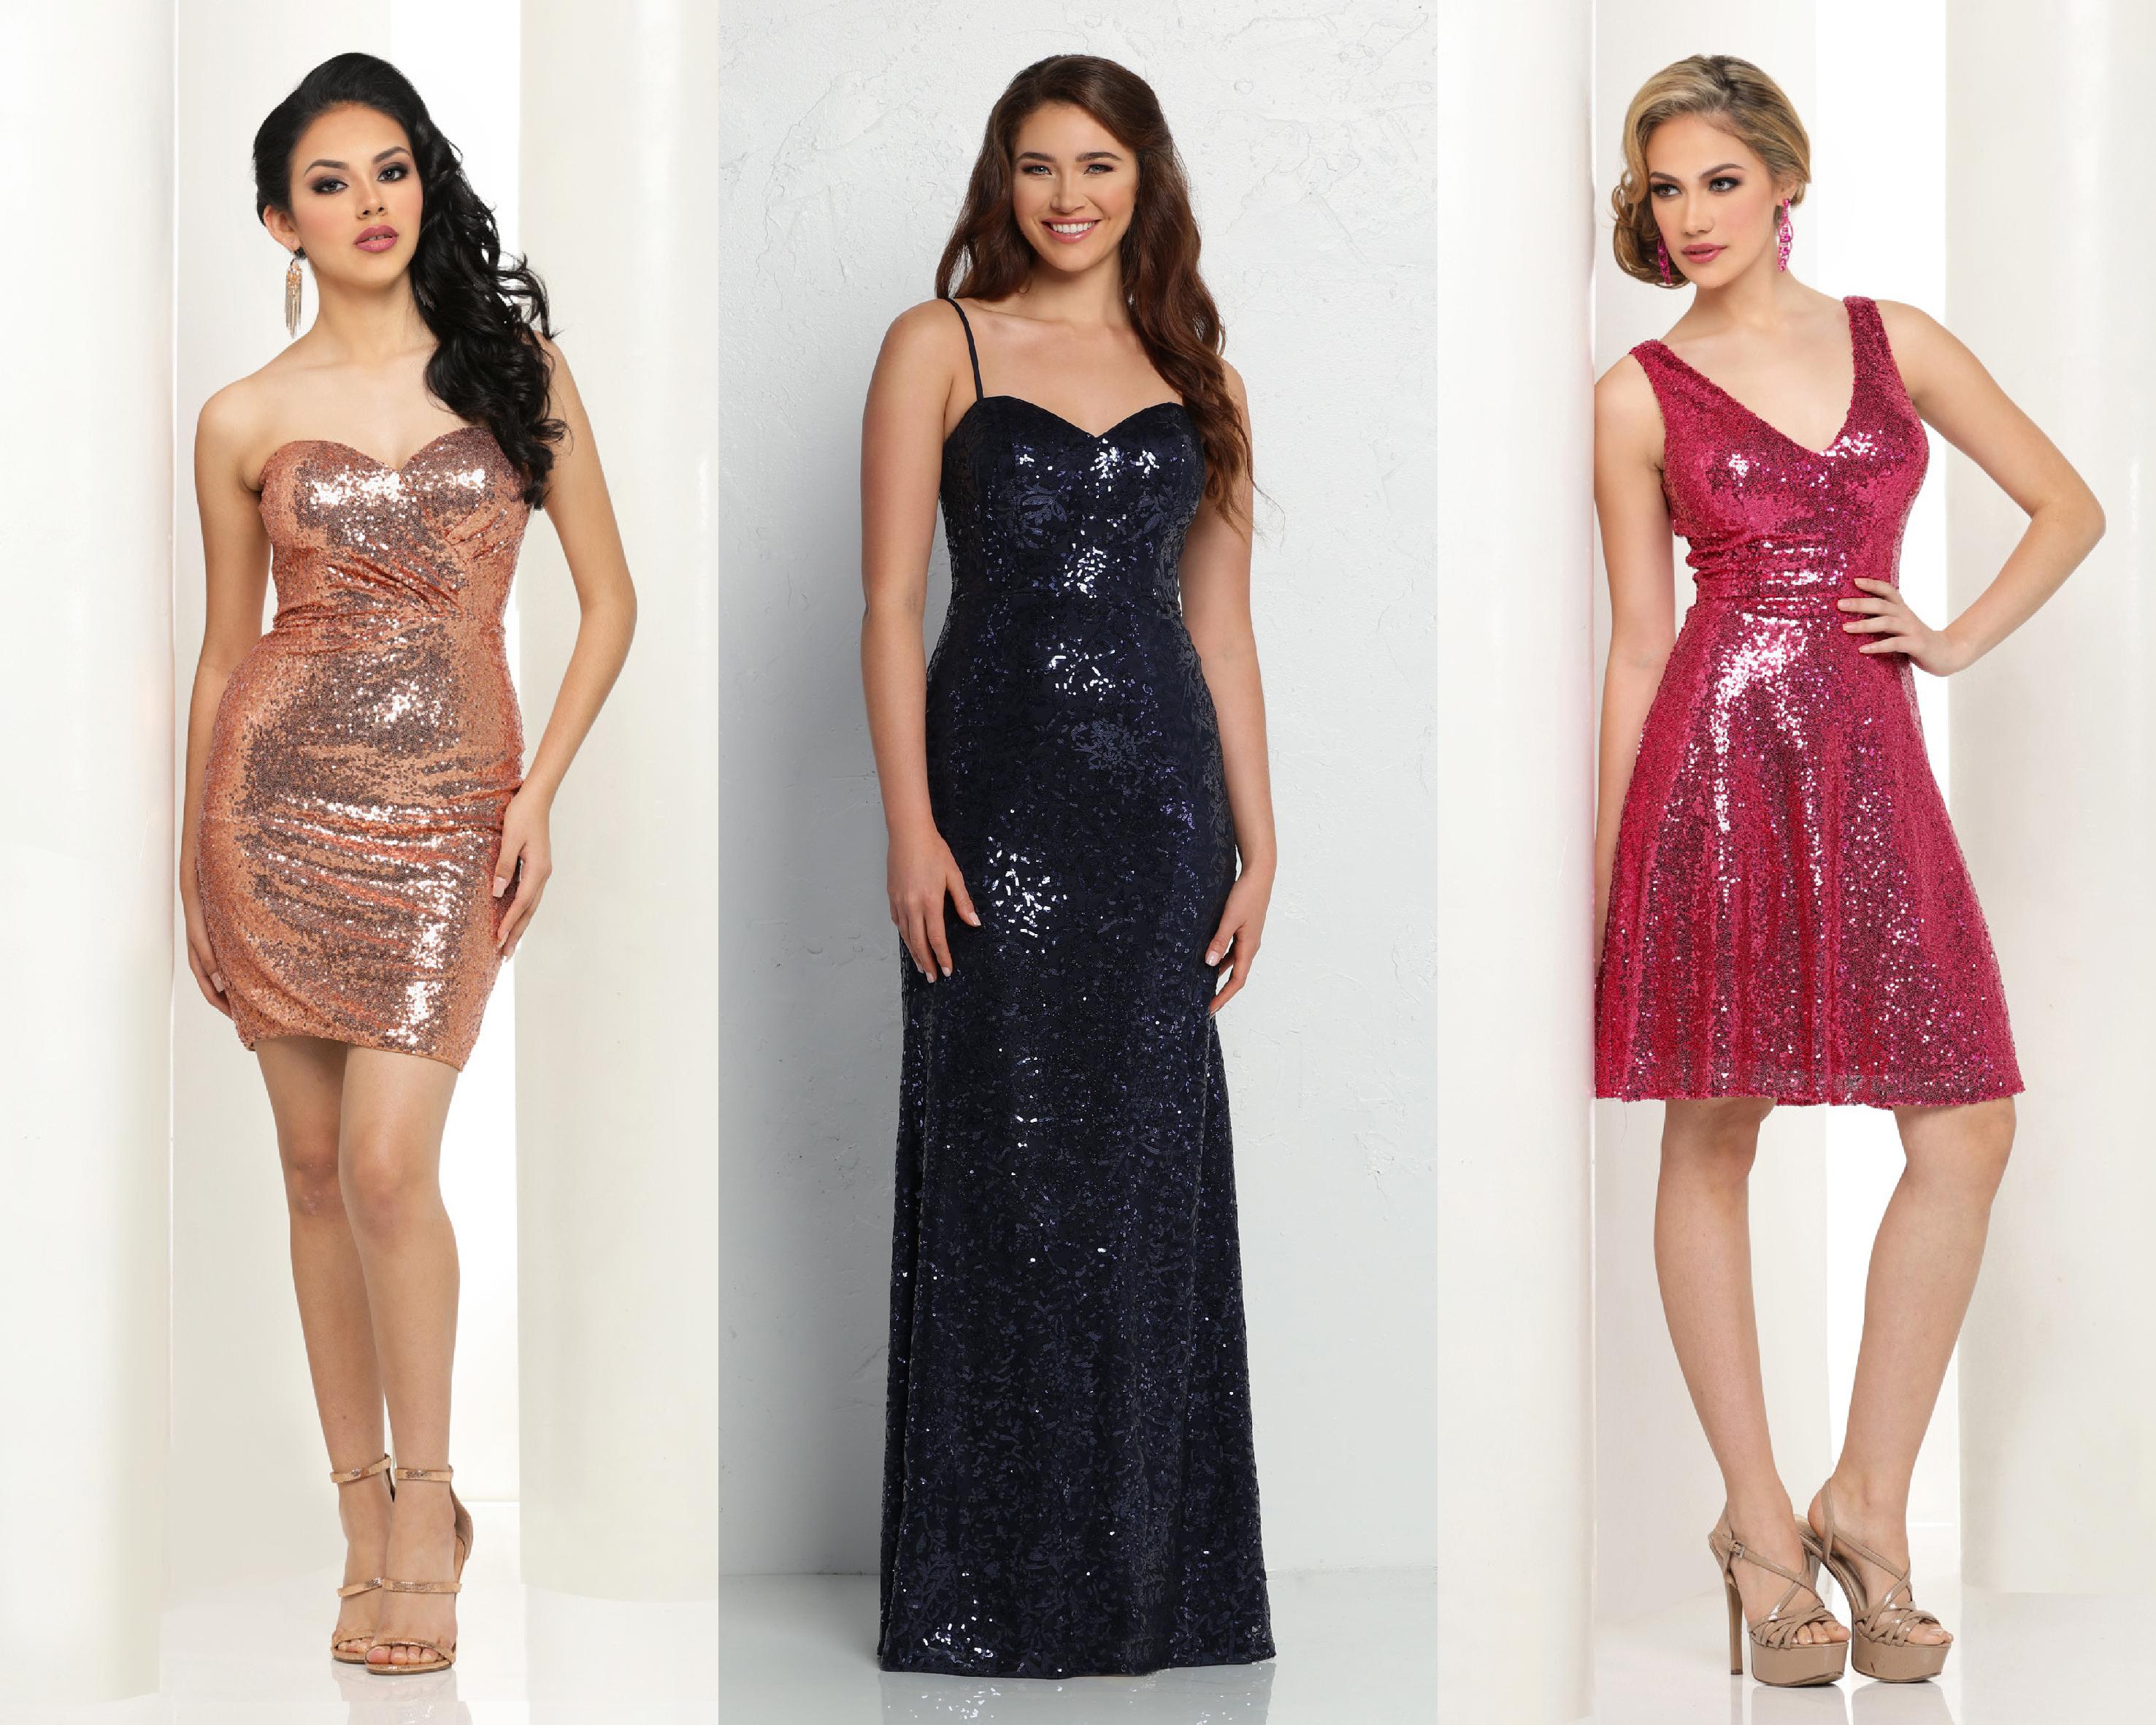 Holiday Fashion Gulde: How to Style a Sequin Dress | DaVinci Bridal Blog